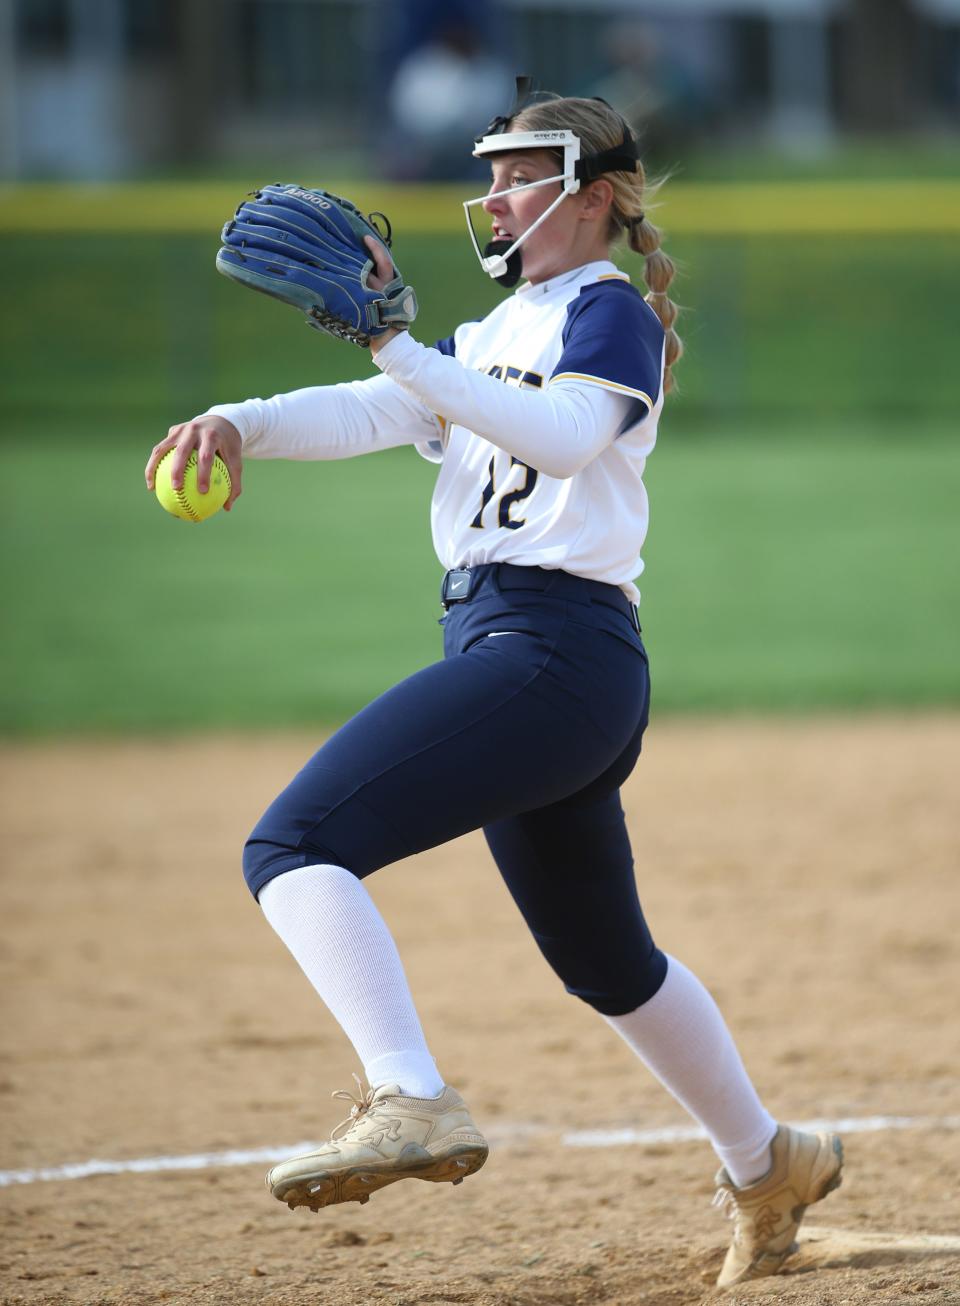 Highland's Alexa Pavese on the pitching mound during Wednesday's game versus Spackenkill on April 19, 2023.